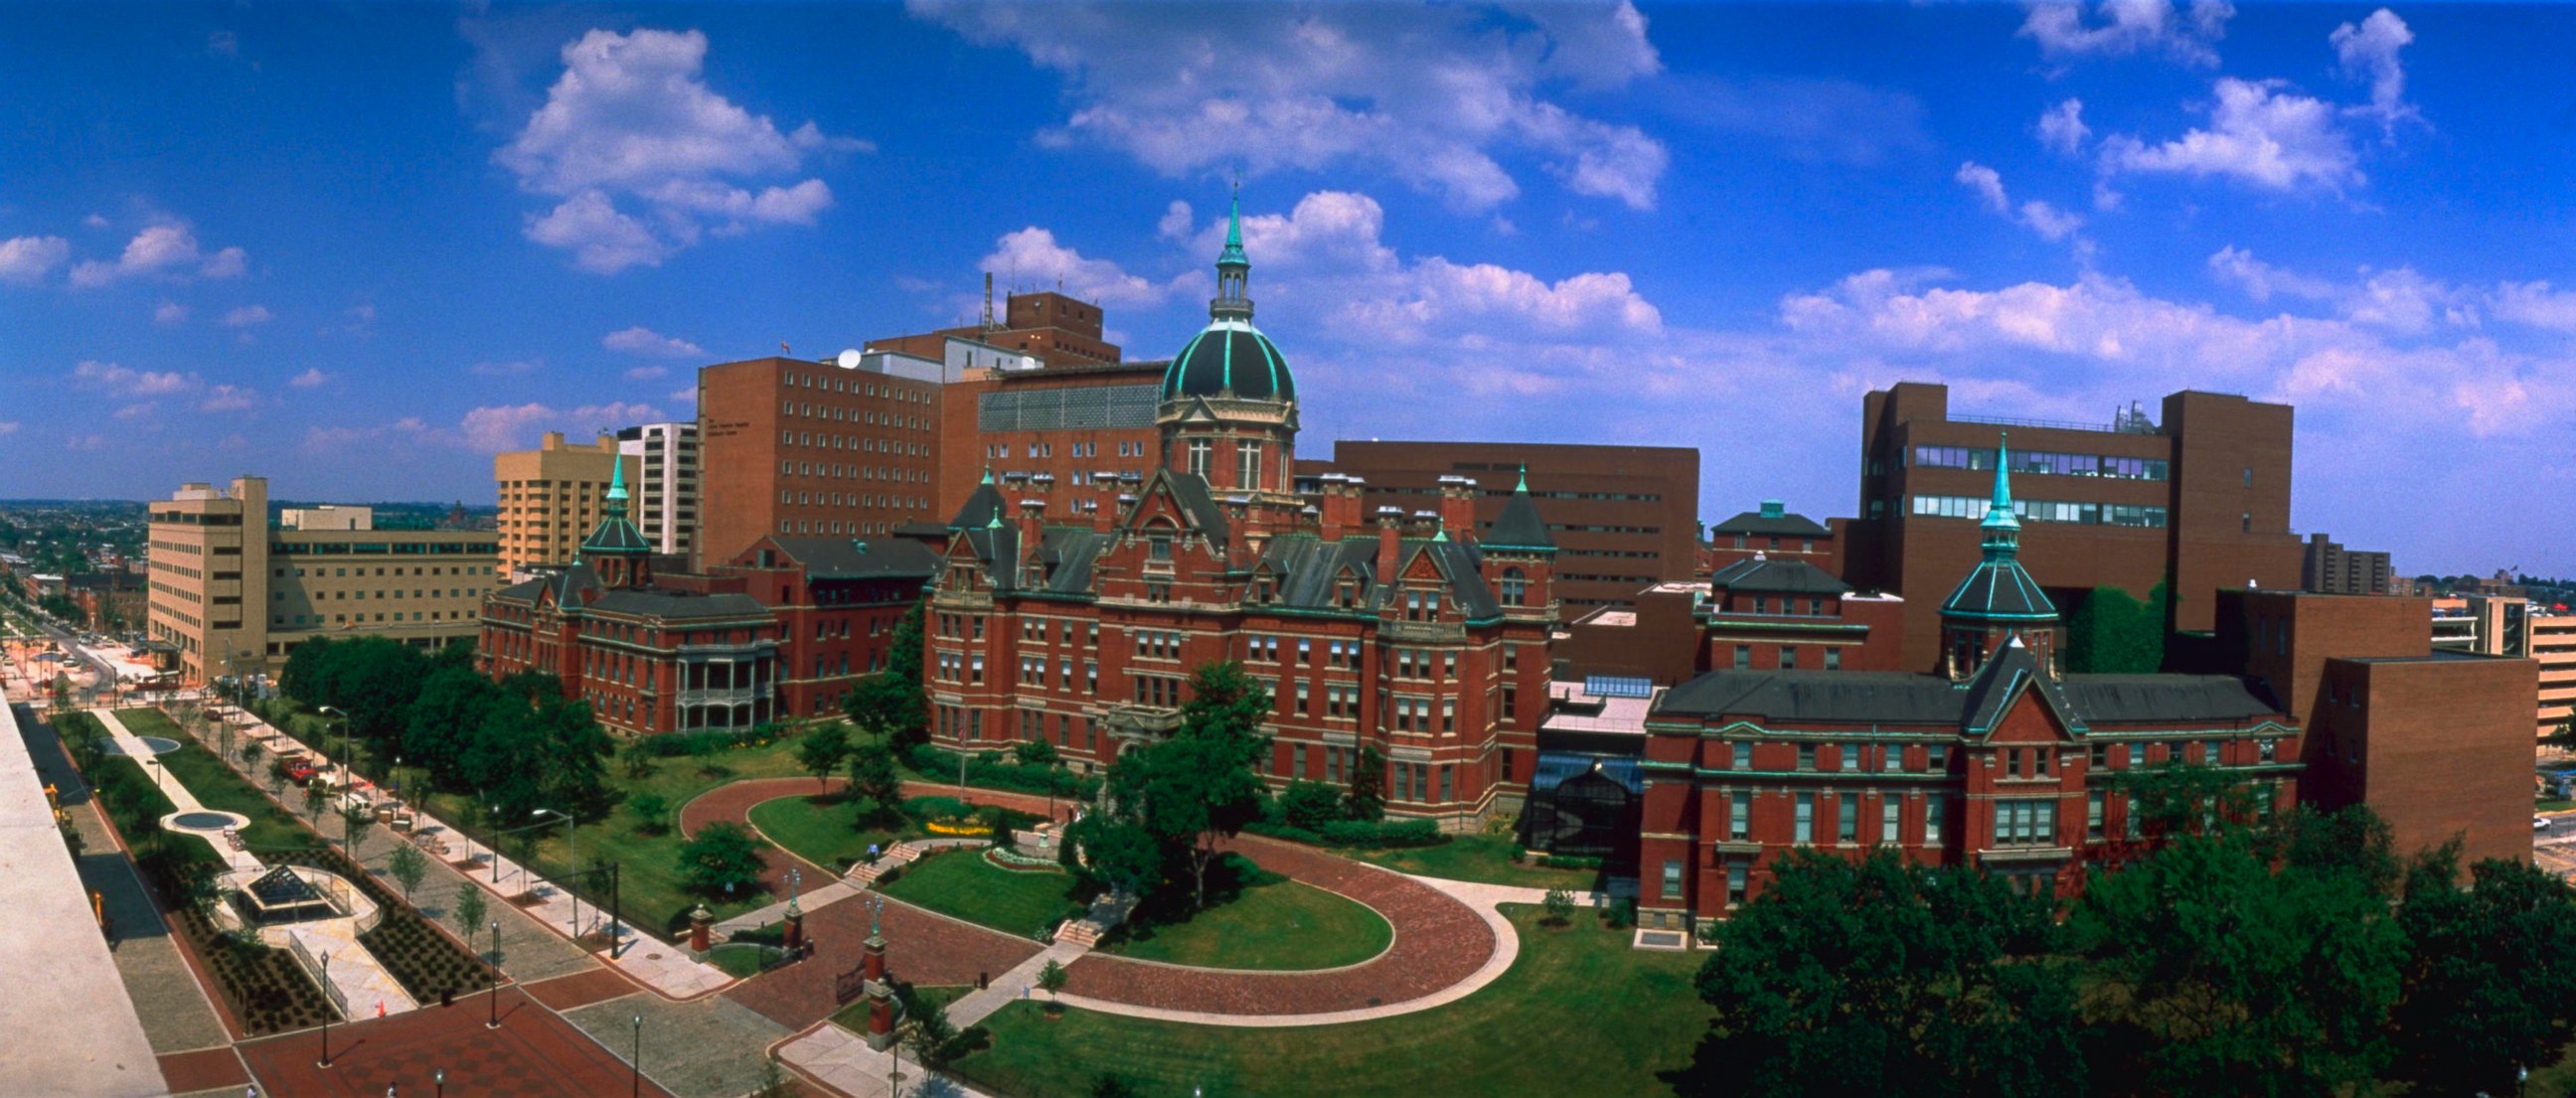 PHOTO: Panoramic view of the Johns Hopkins Hospital Campus in Baltimore.